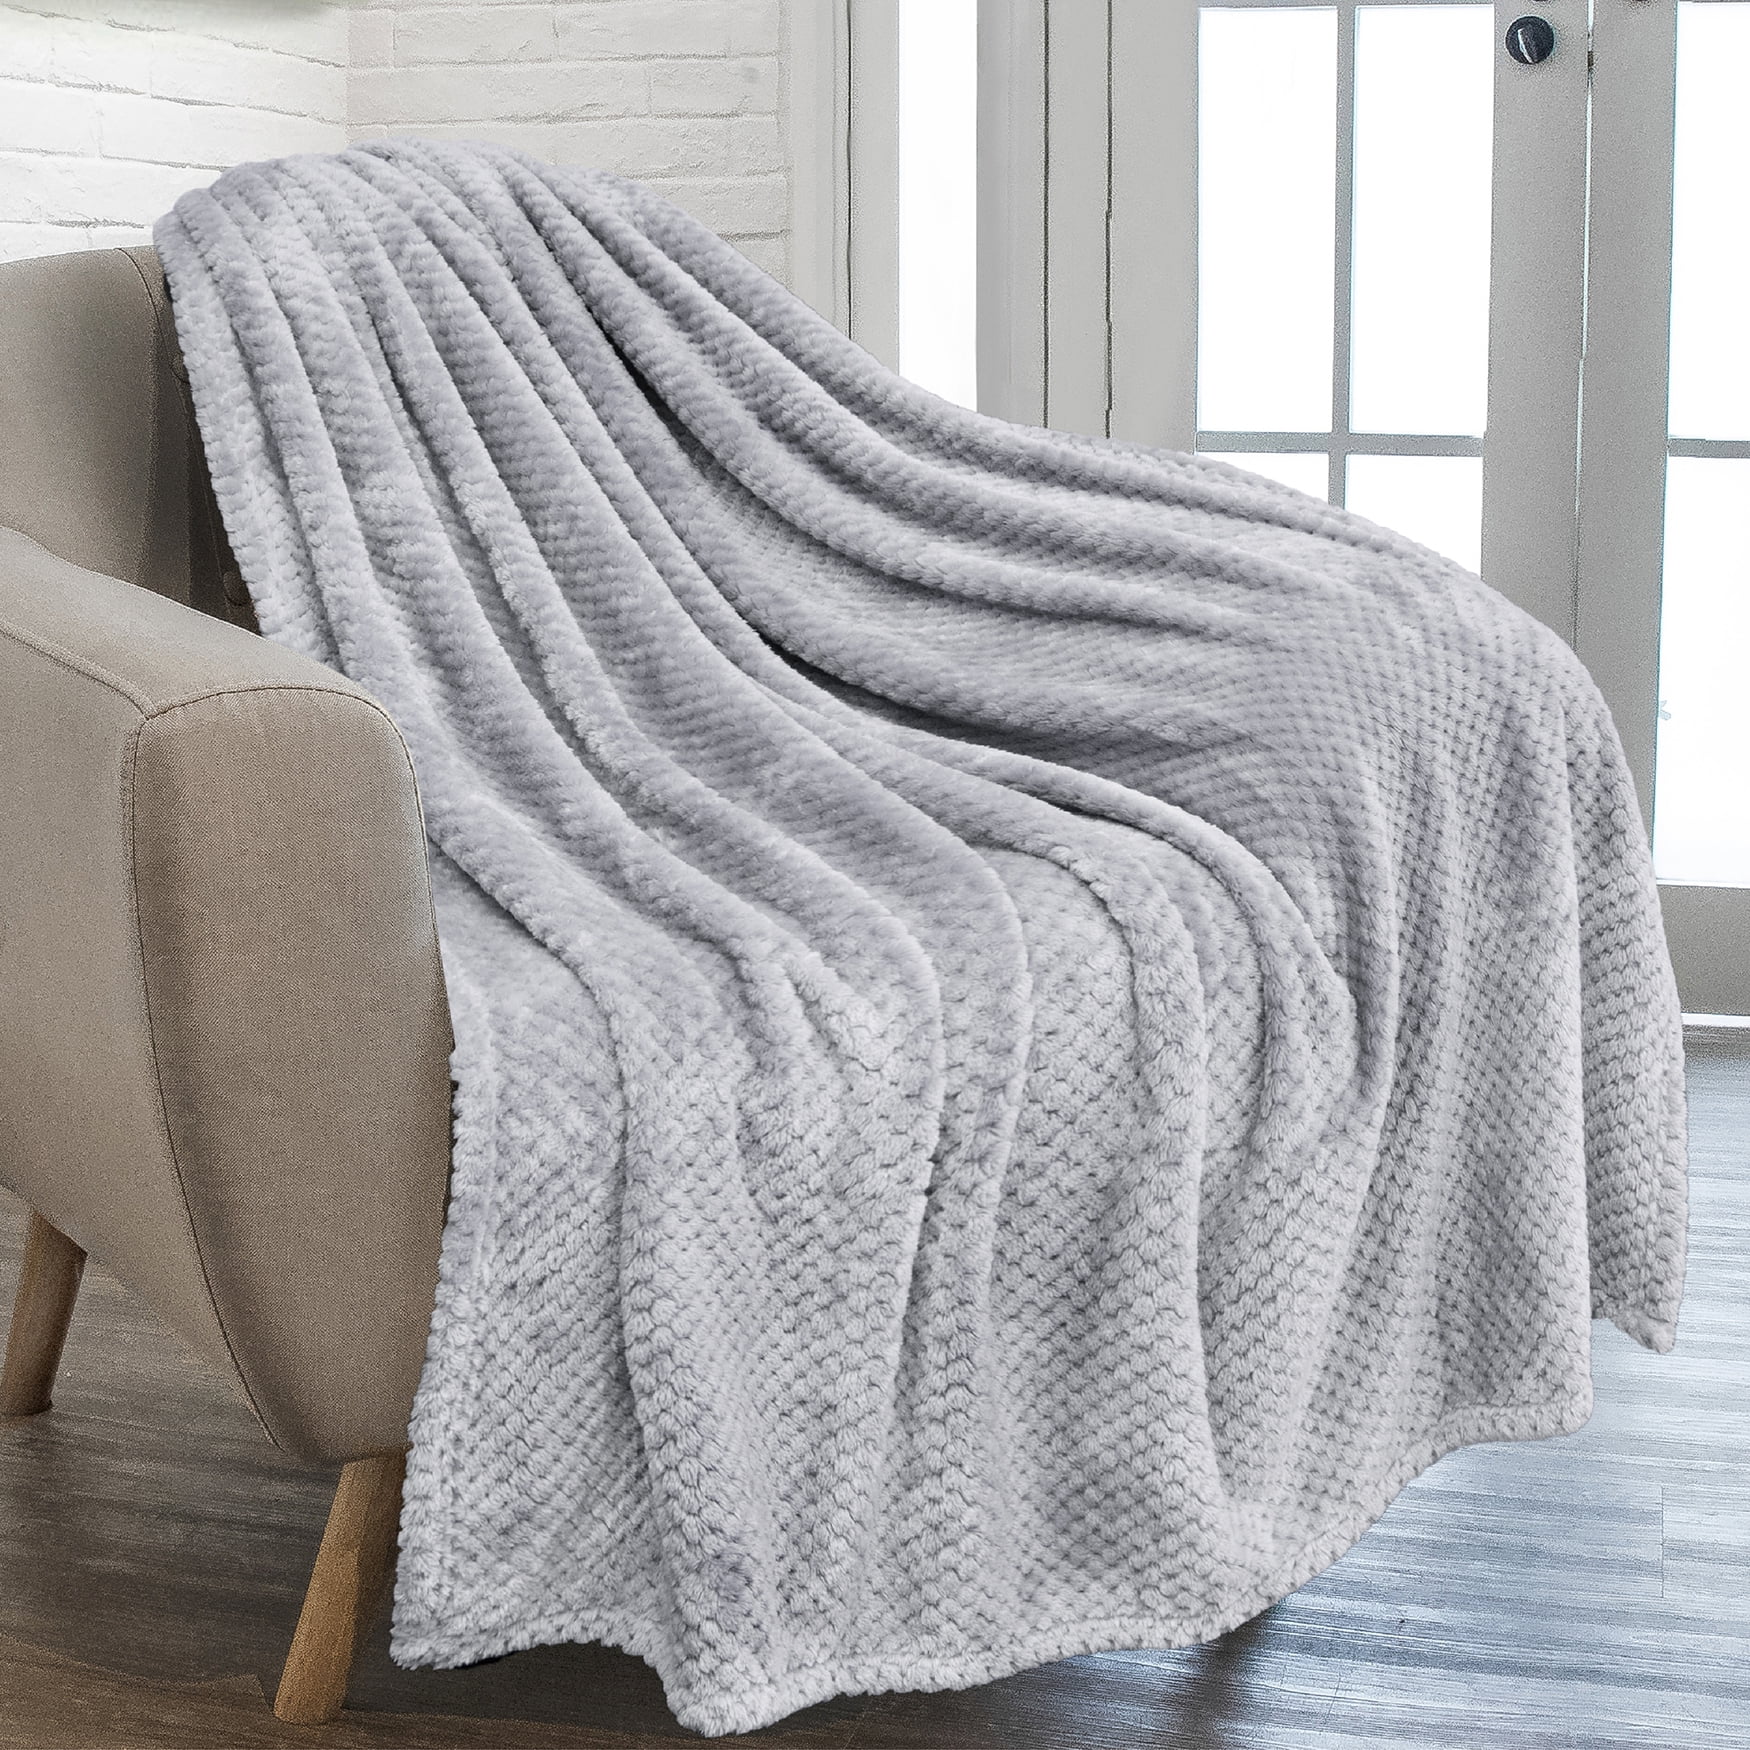 Warm and Comfortable Blanket Gifts（3） Cars Suitable for Sofas Lightweight Living Rooms Exquisite Fish Print Blanket 7 All-Season Microfiber Flannel Super Soft 